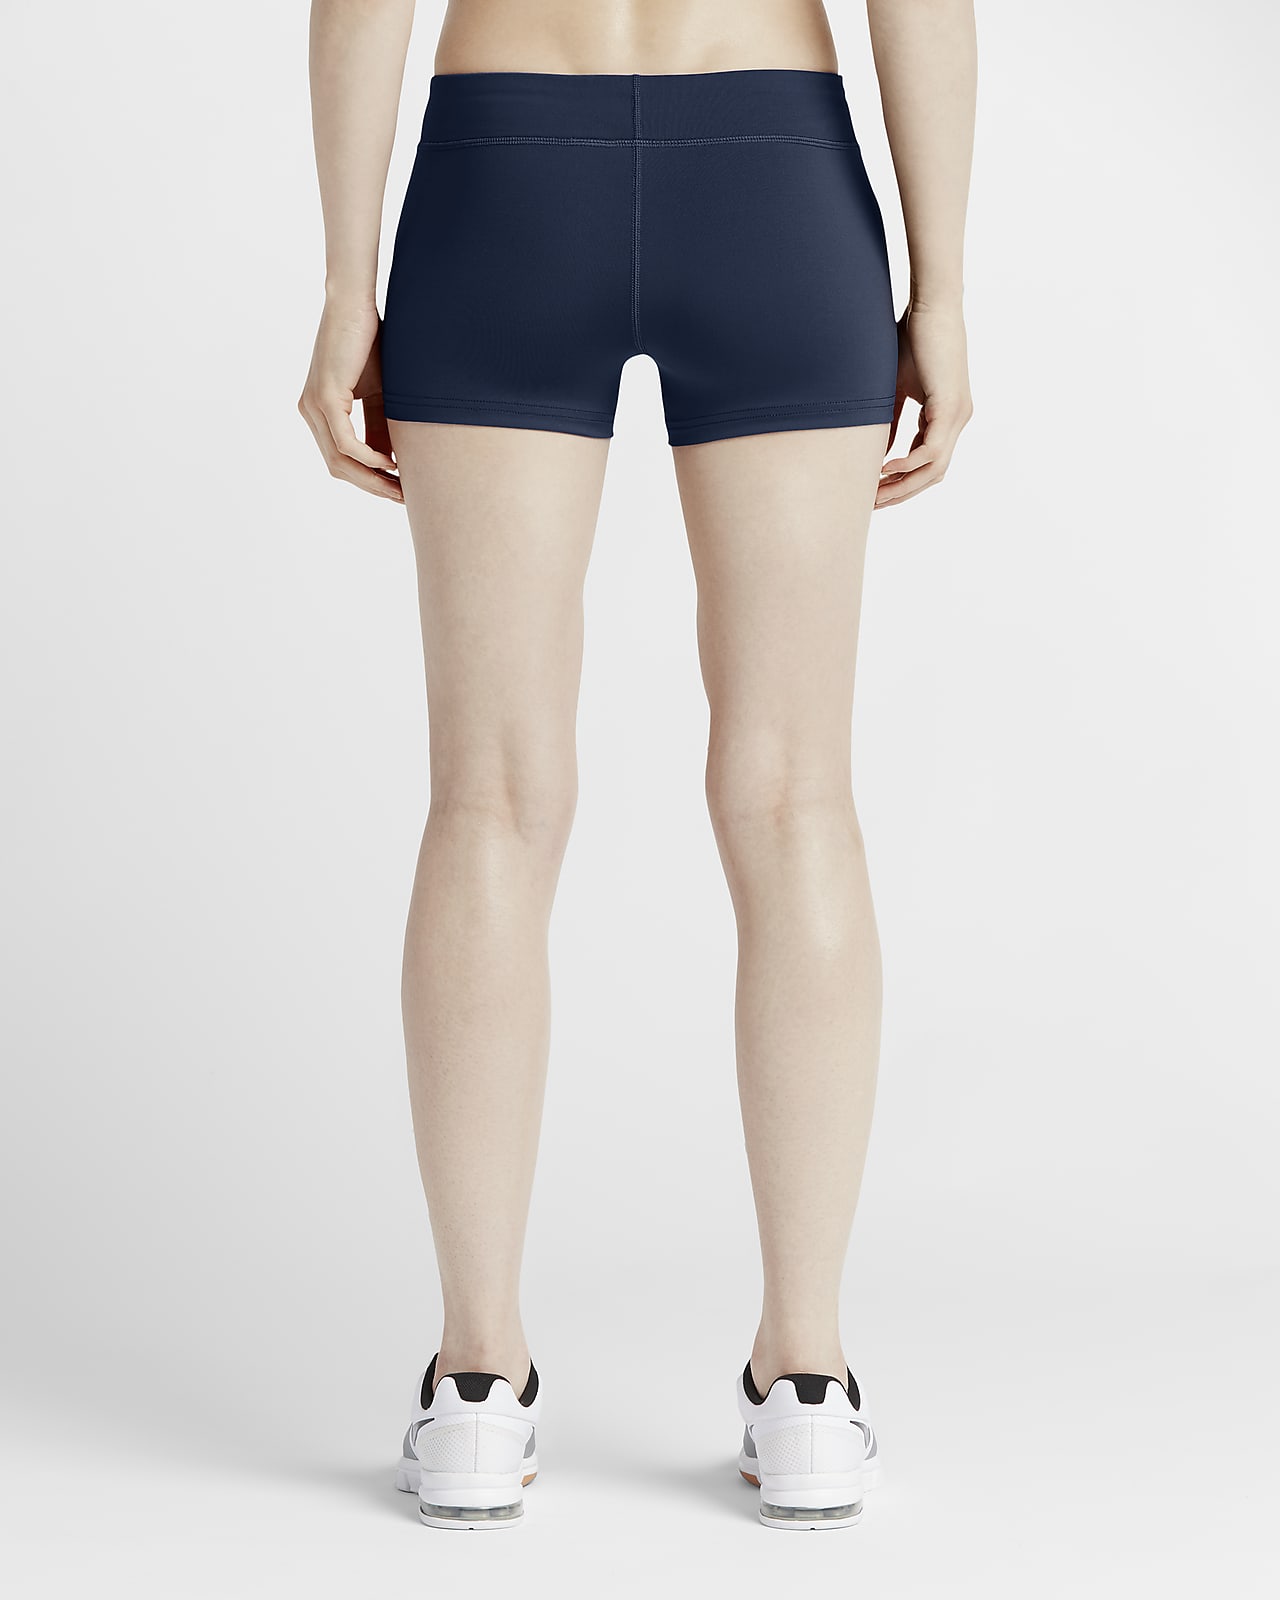 shallow climb The Hotel Nike Performance Women's Game Volleyball Shorts. Nike.com